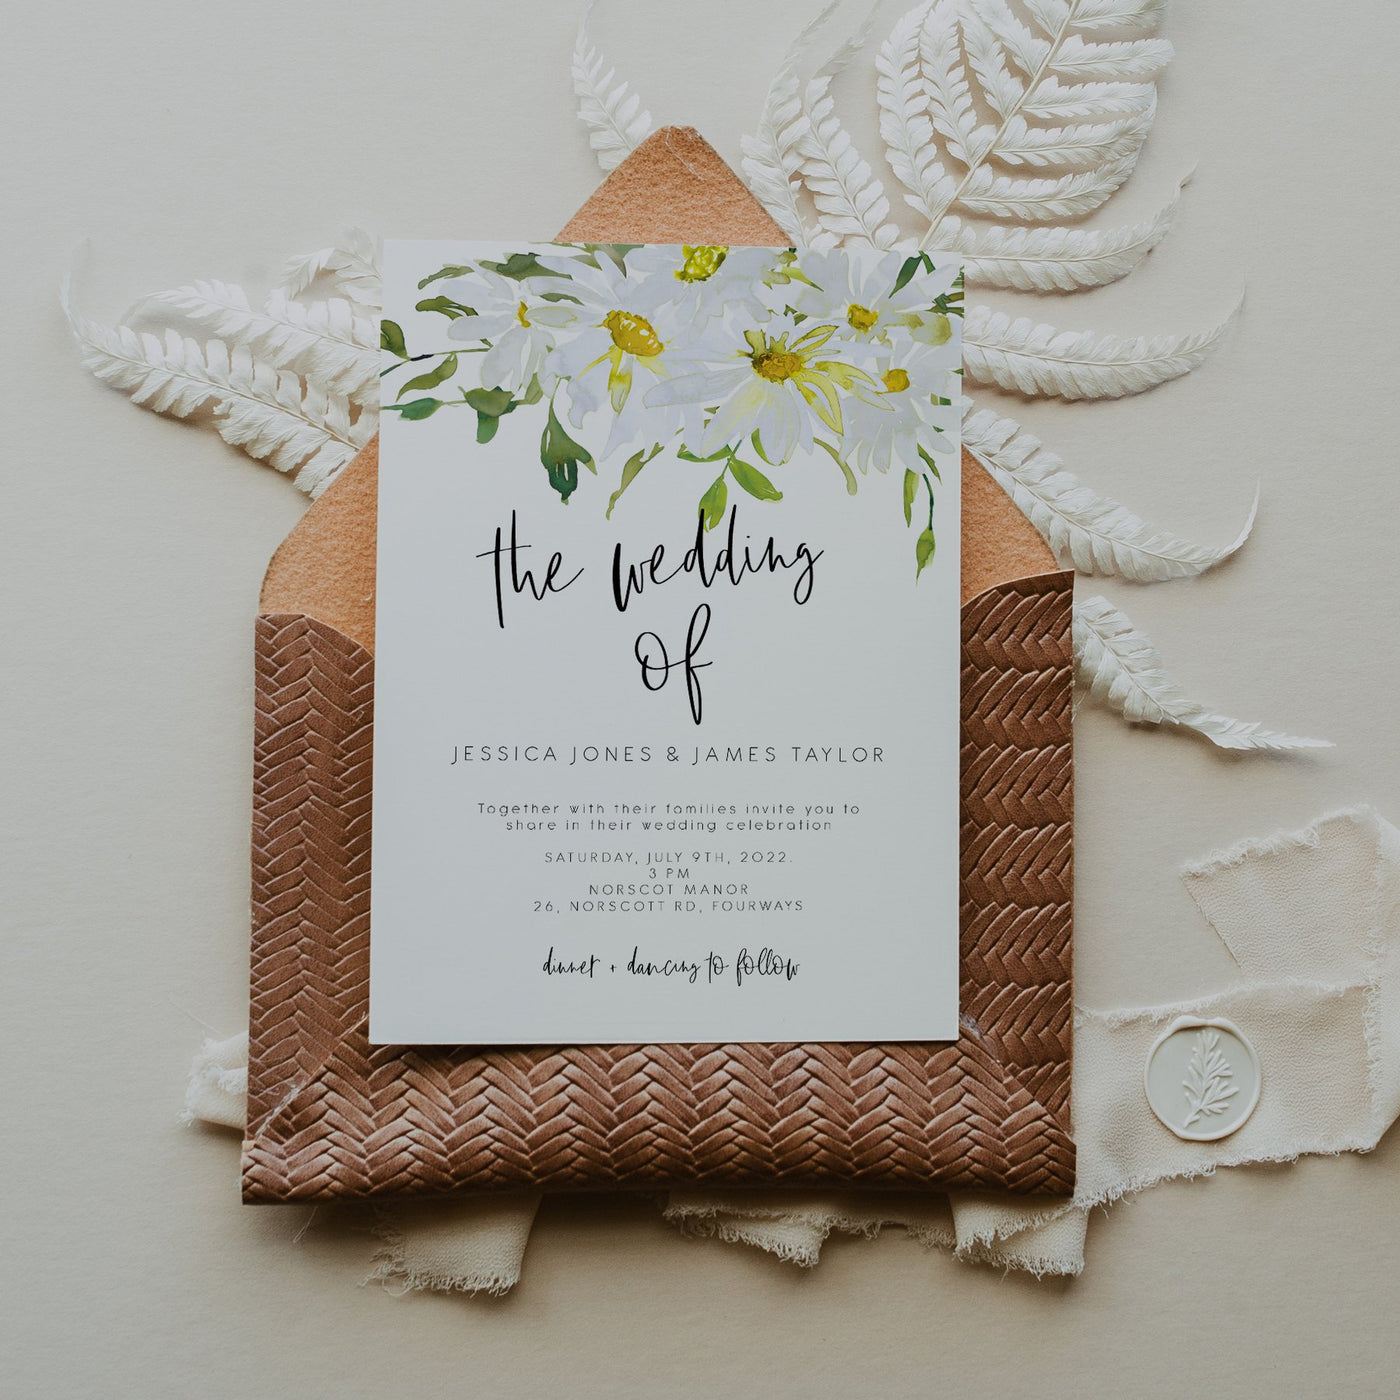 6 Easy Steps to Writing & Wording your Own Wedding Invitations